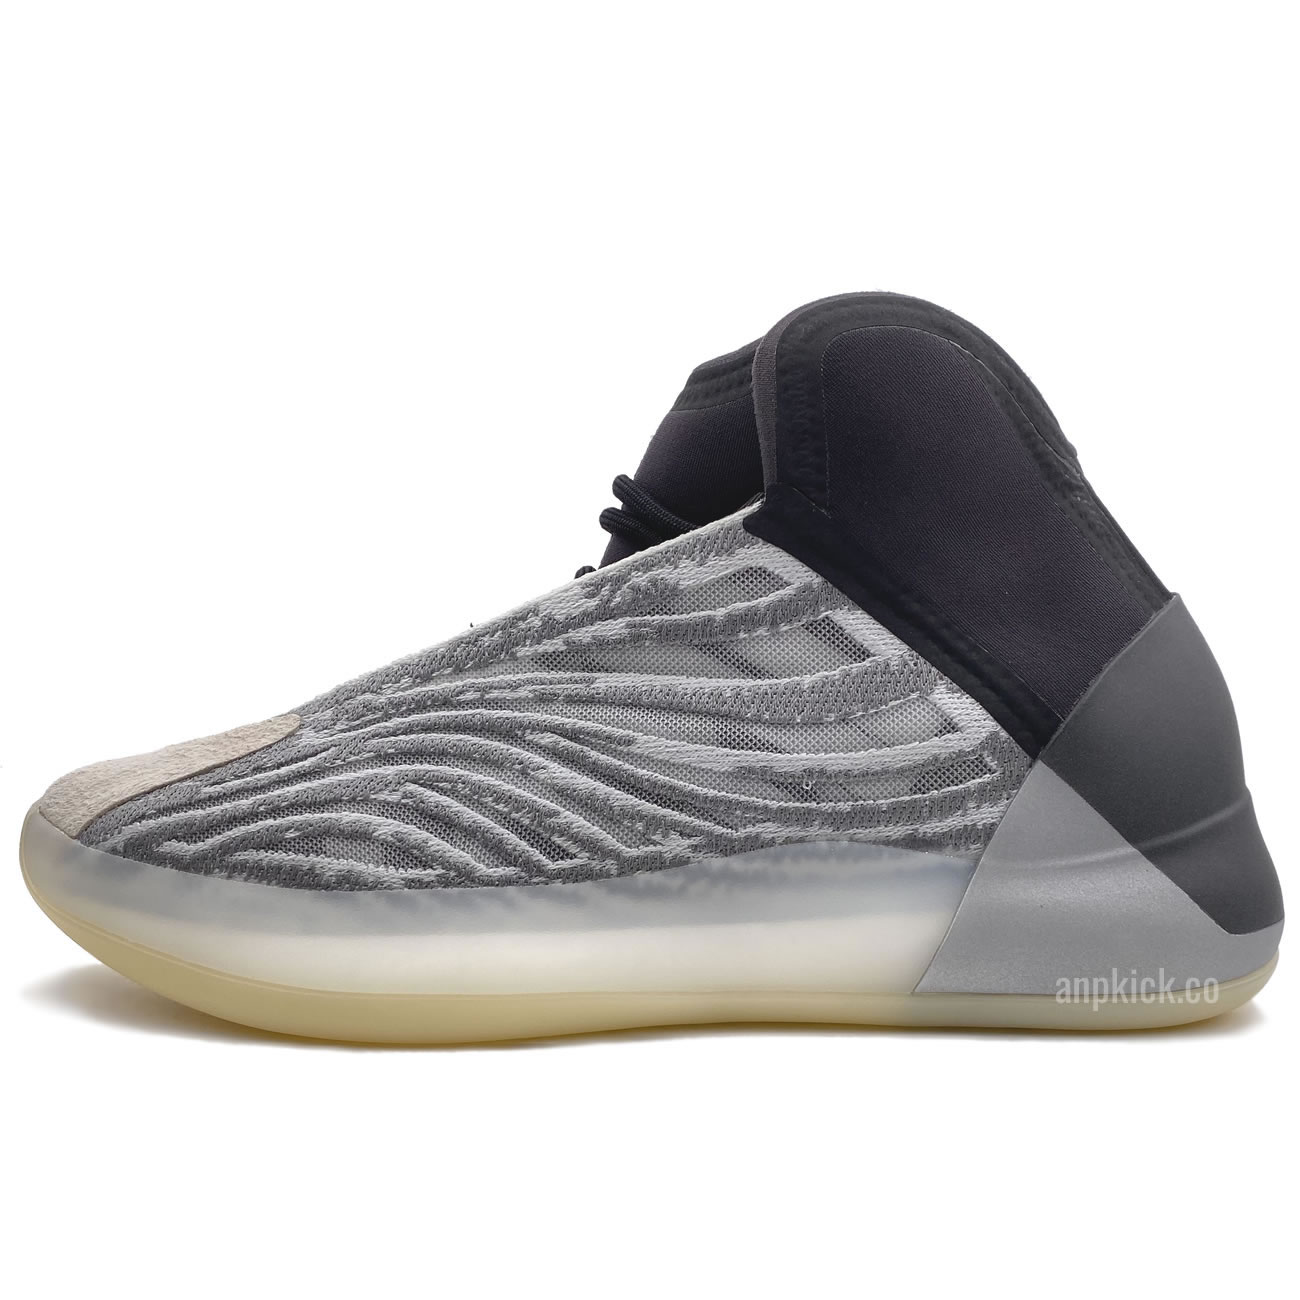 Adidas Yeezy Basketball Quantum Boost For Sale New Release Eg1535 (1) - newkick.org